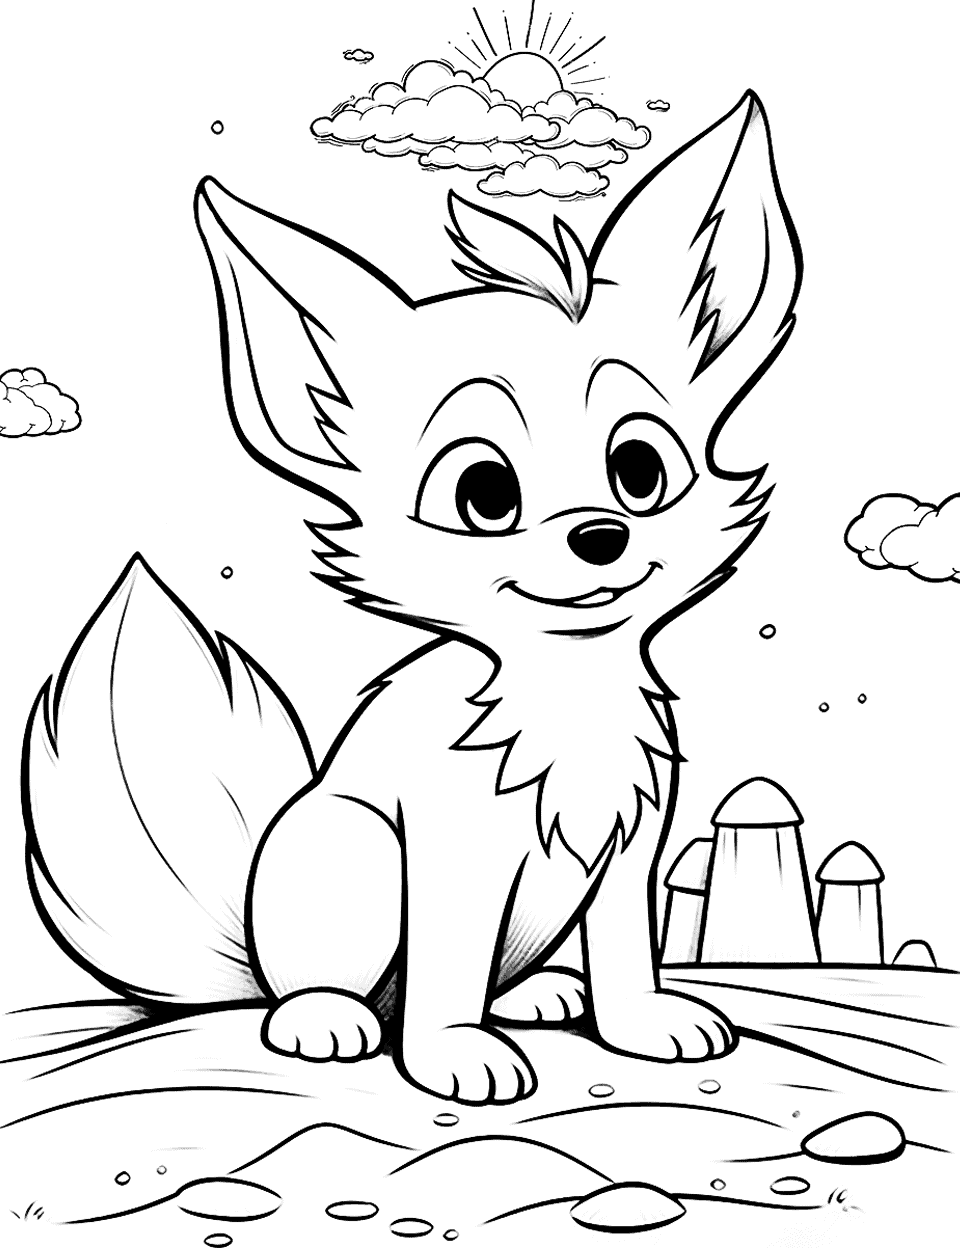 Beach Day Fox Coloring Page - A fox enjoying the beach’s sunny vibes.